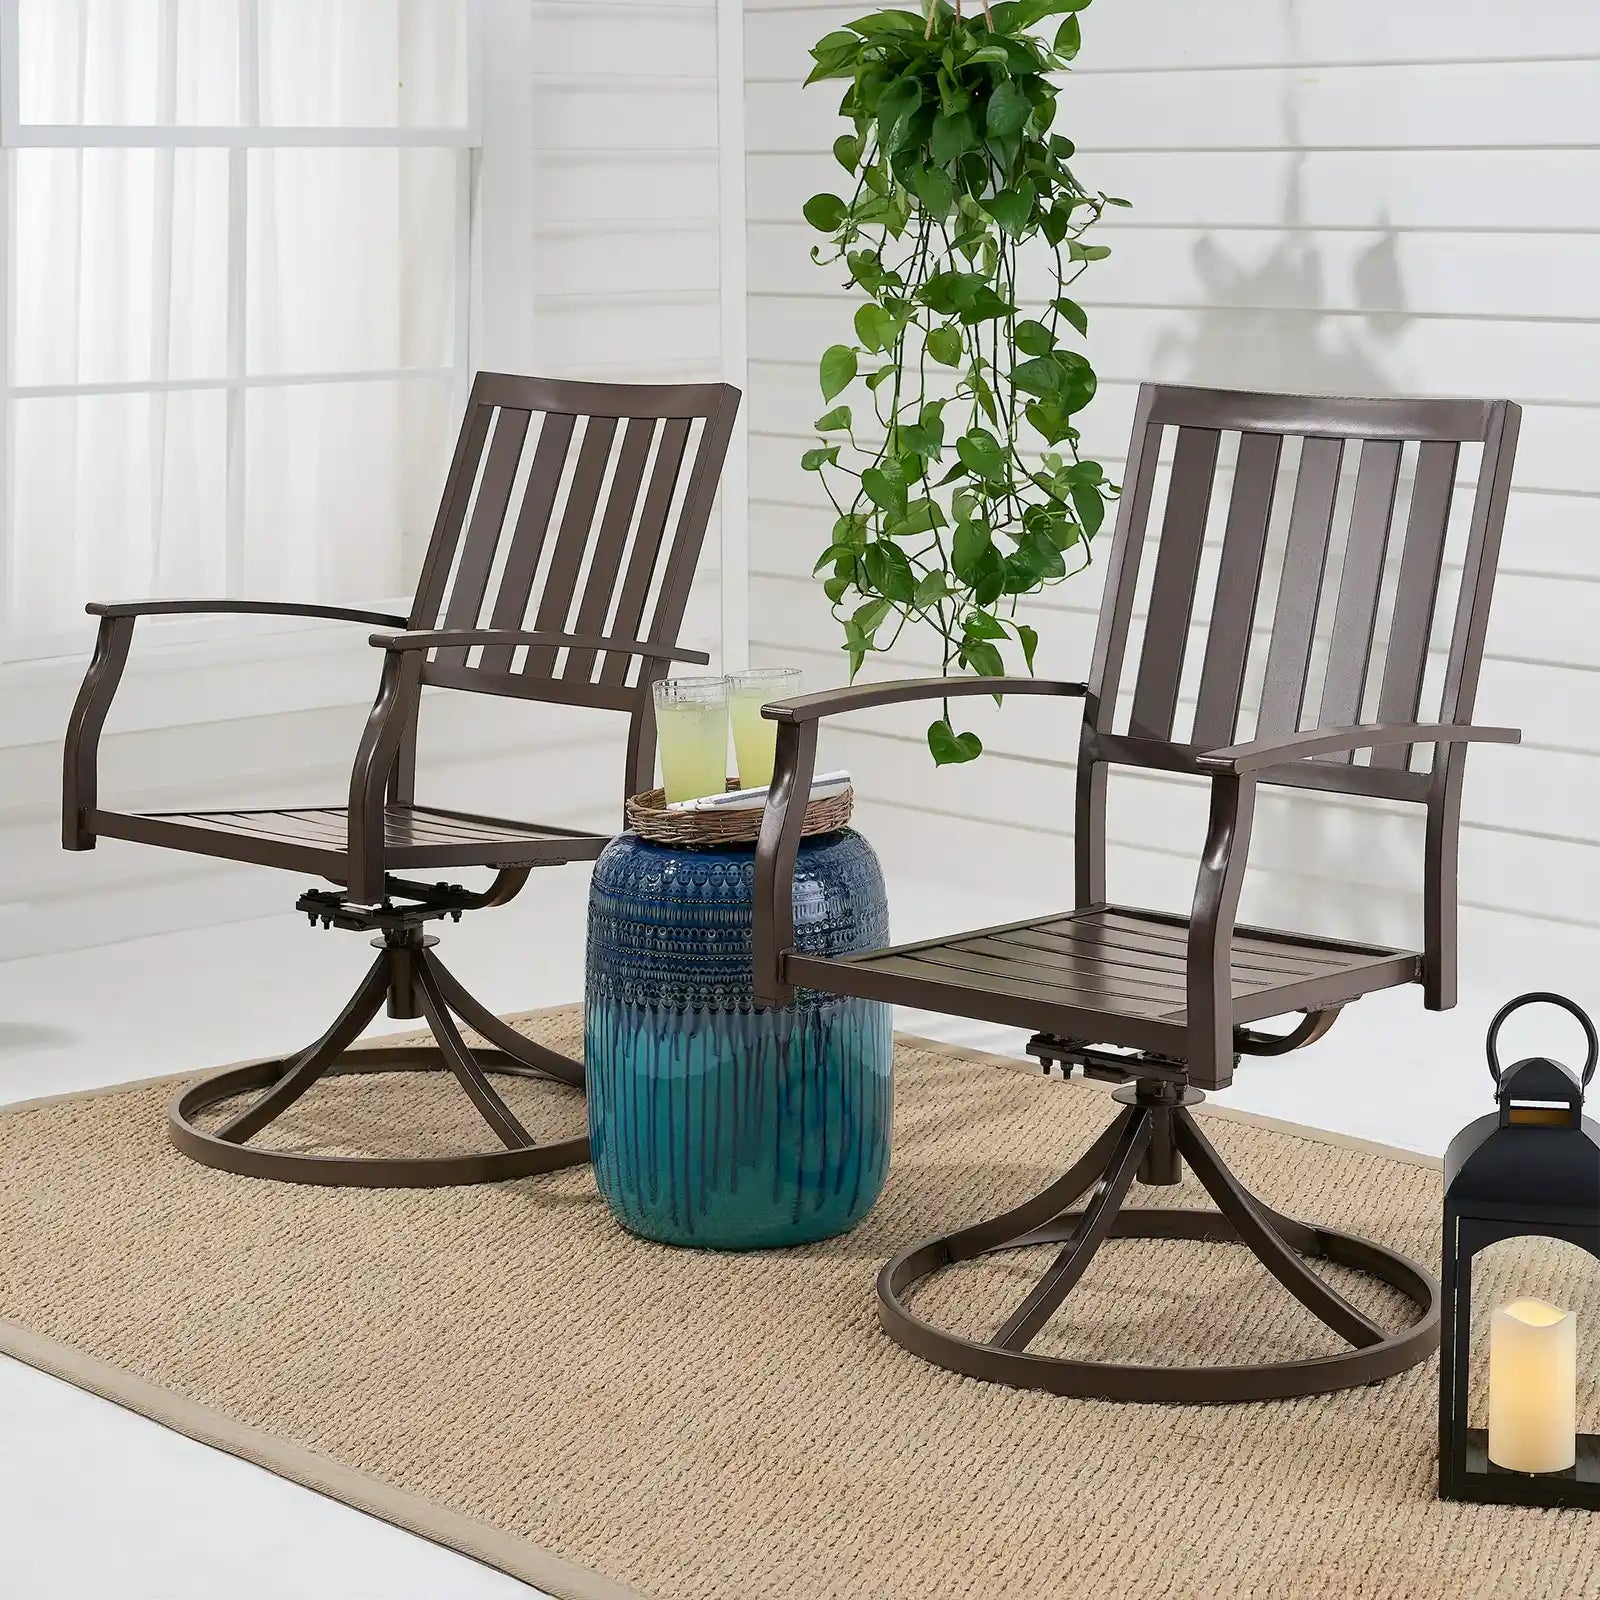 Farmhouse Brown Steel Outdoor Patio Swivel Chairs, Set of 2